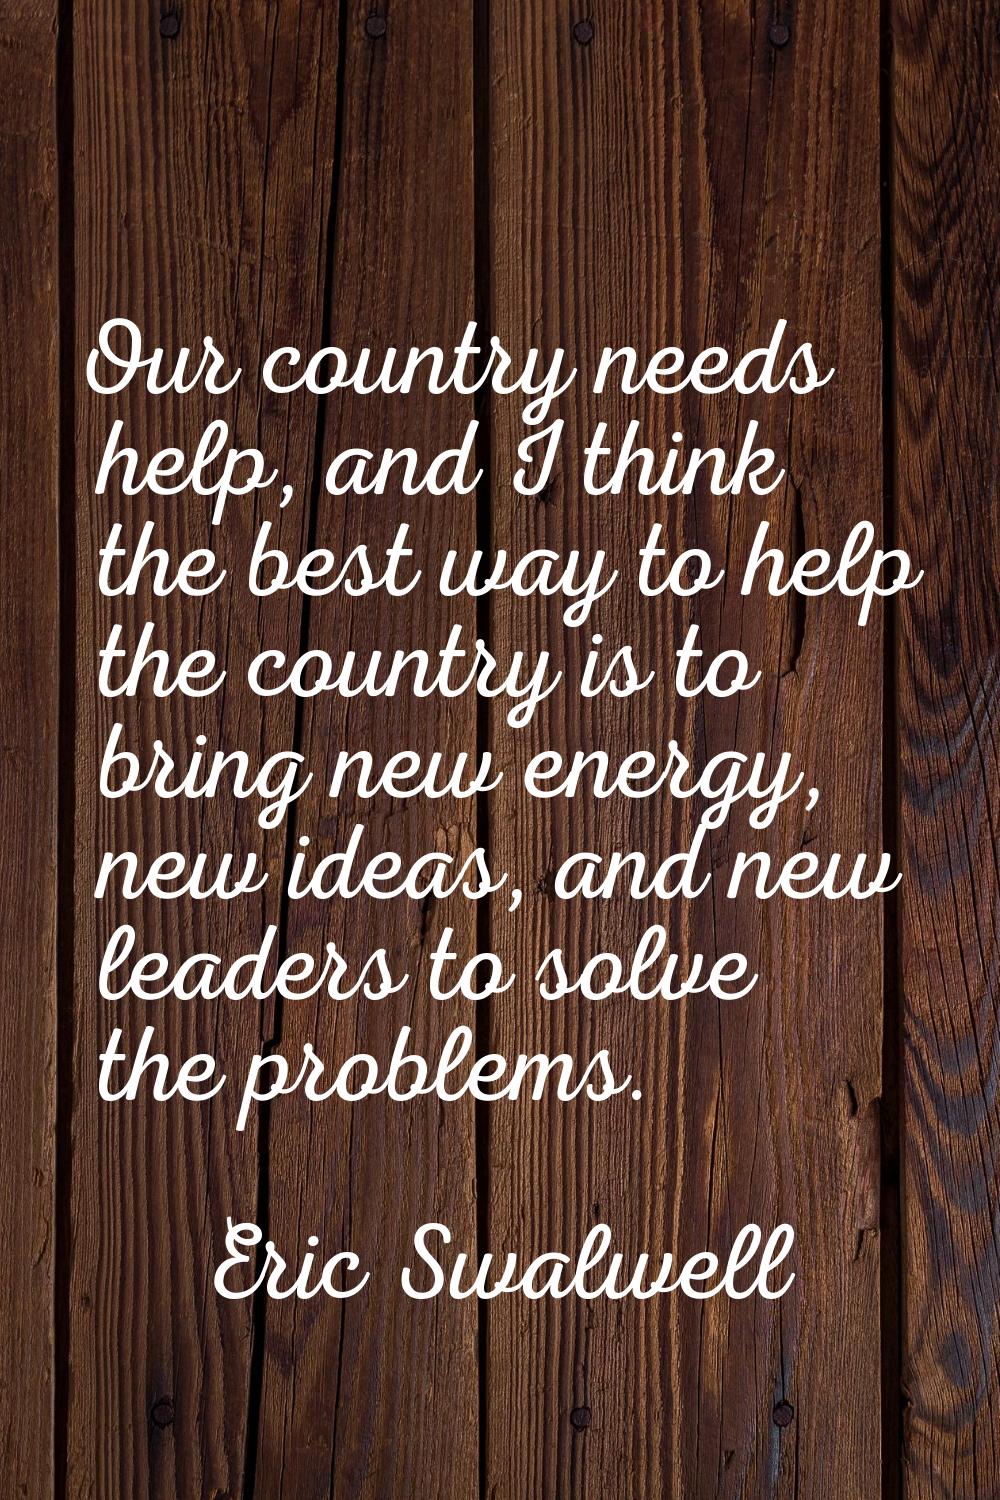 Our country needs help, and I think the best way to help the country is to bring new energy, new id